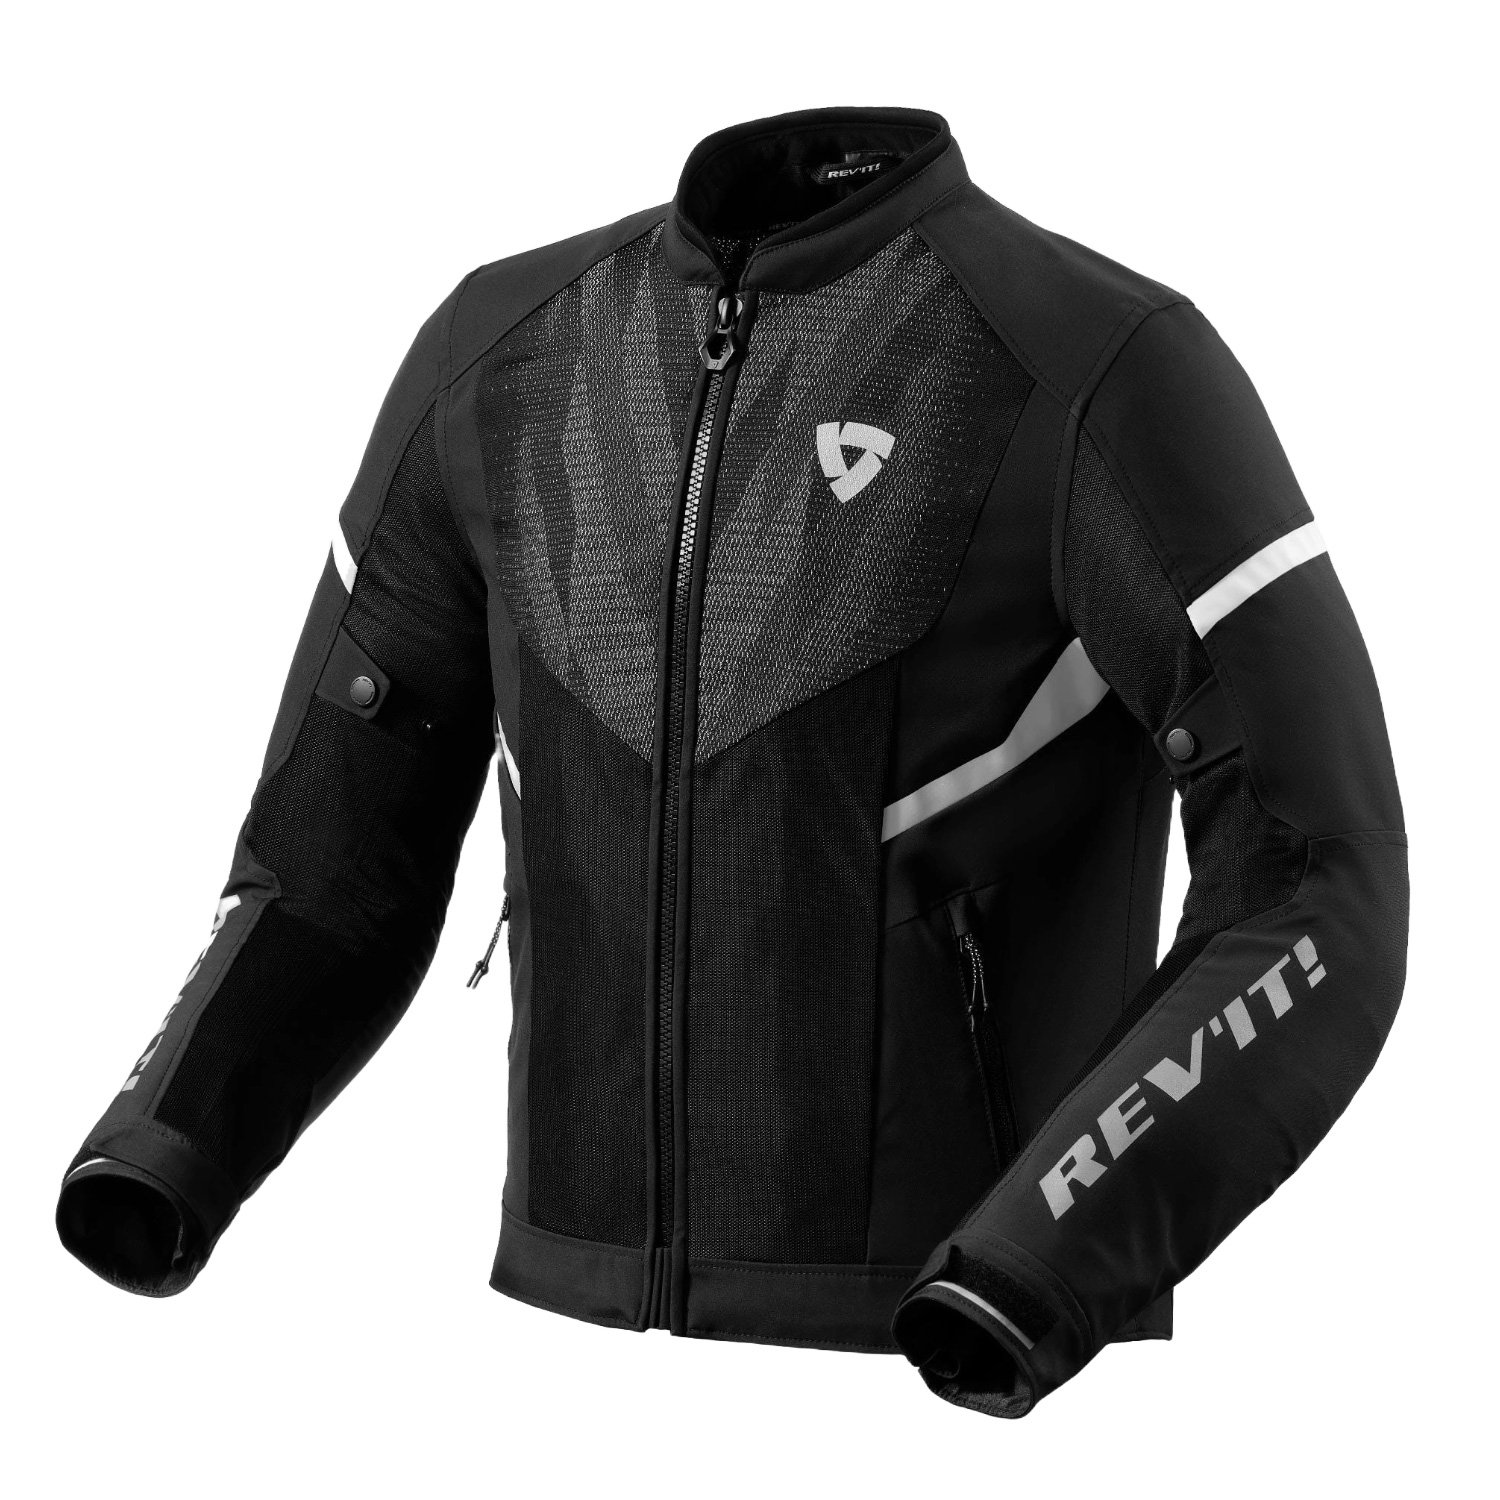 Image of REV'IT! Hyperspeed 2 GT Air Jacket Black White Size S ID 8700001367646